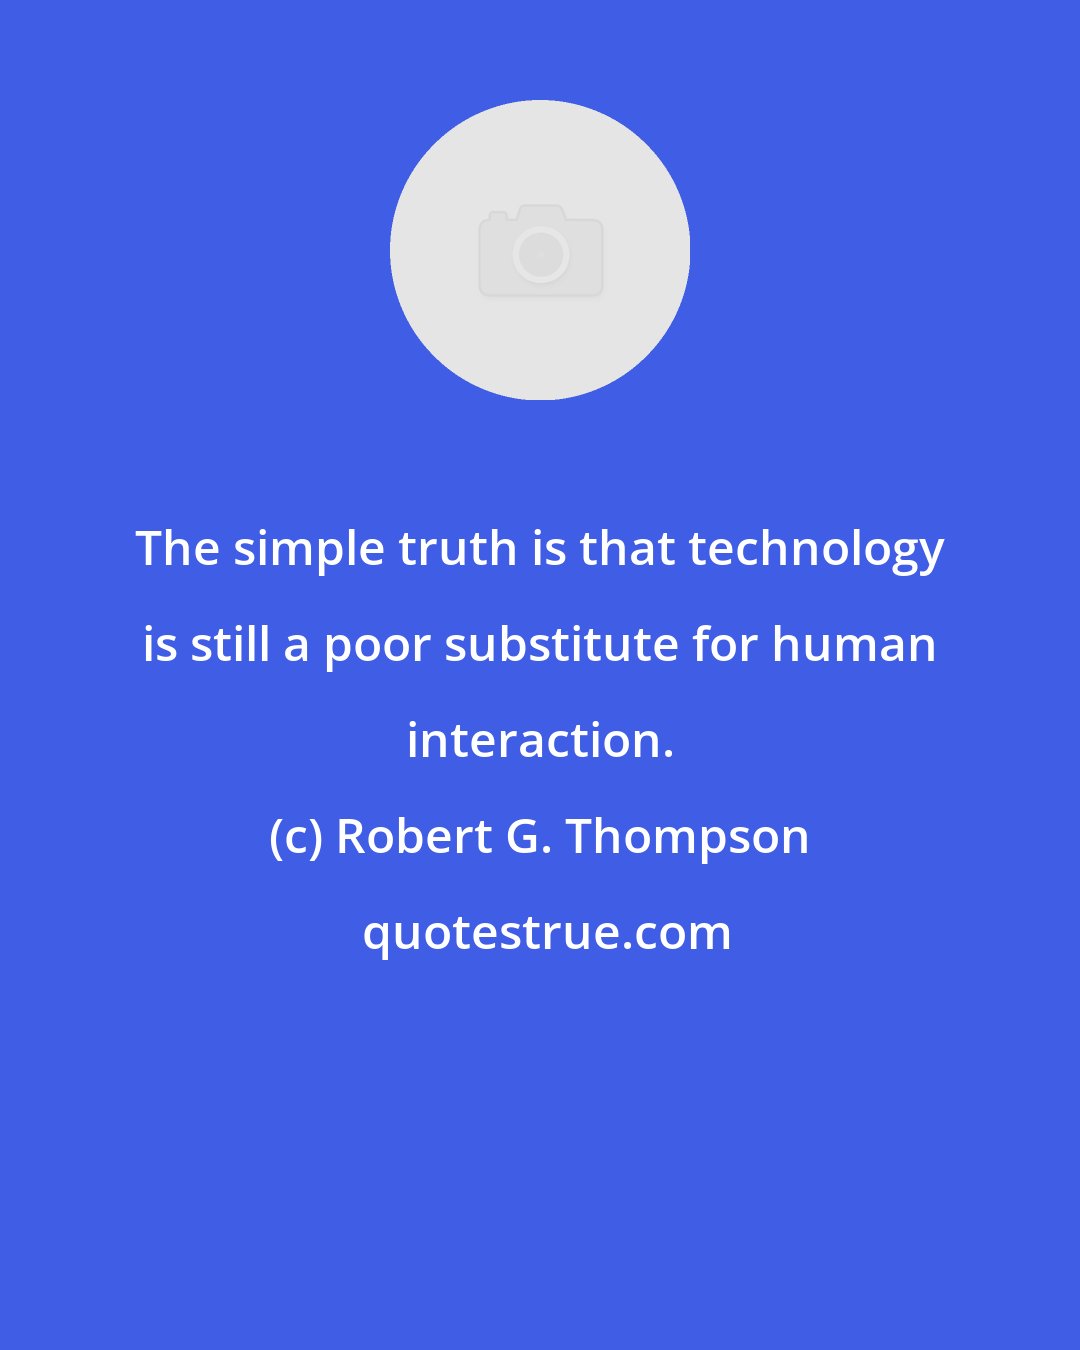 Robert G. Thompson: The simple truth is that technology is still a poor substitute for human interaction.